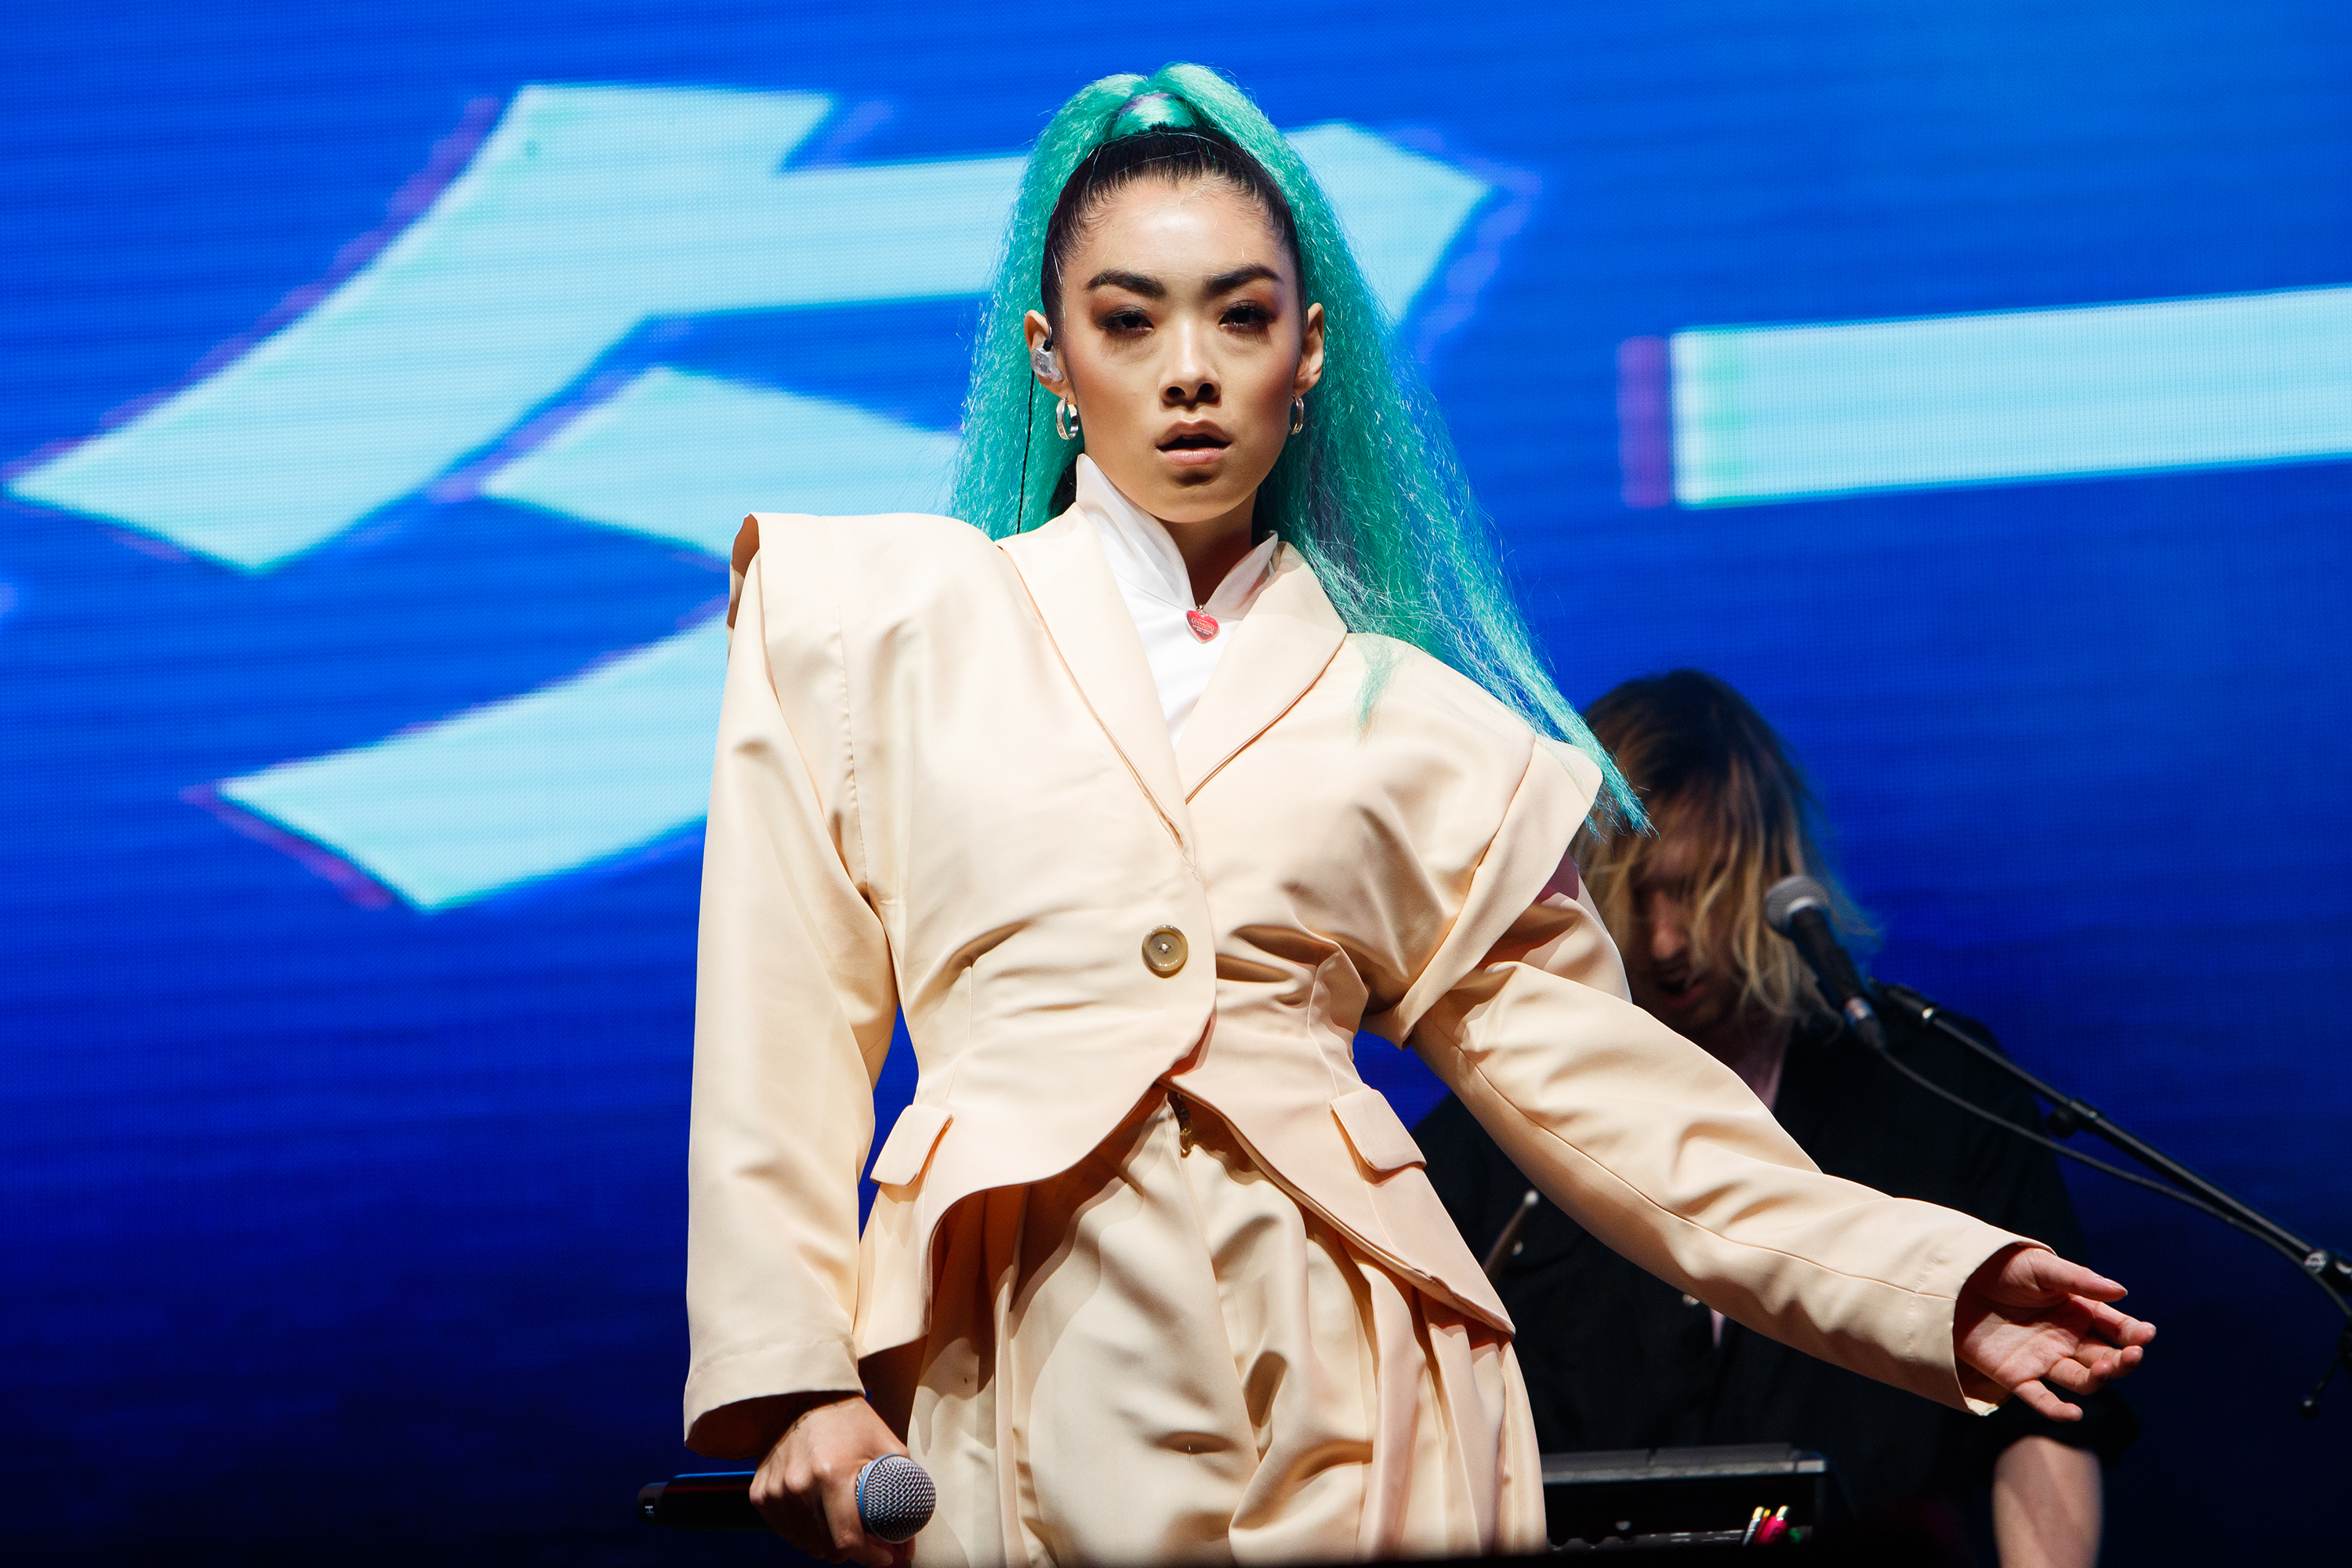 Rina Sawayama performs during All Points East Festival at Victoria Park on May 26, 2019, in London, England. | Source: Getty Images